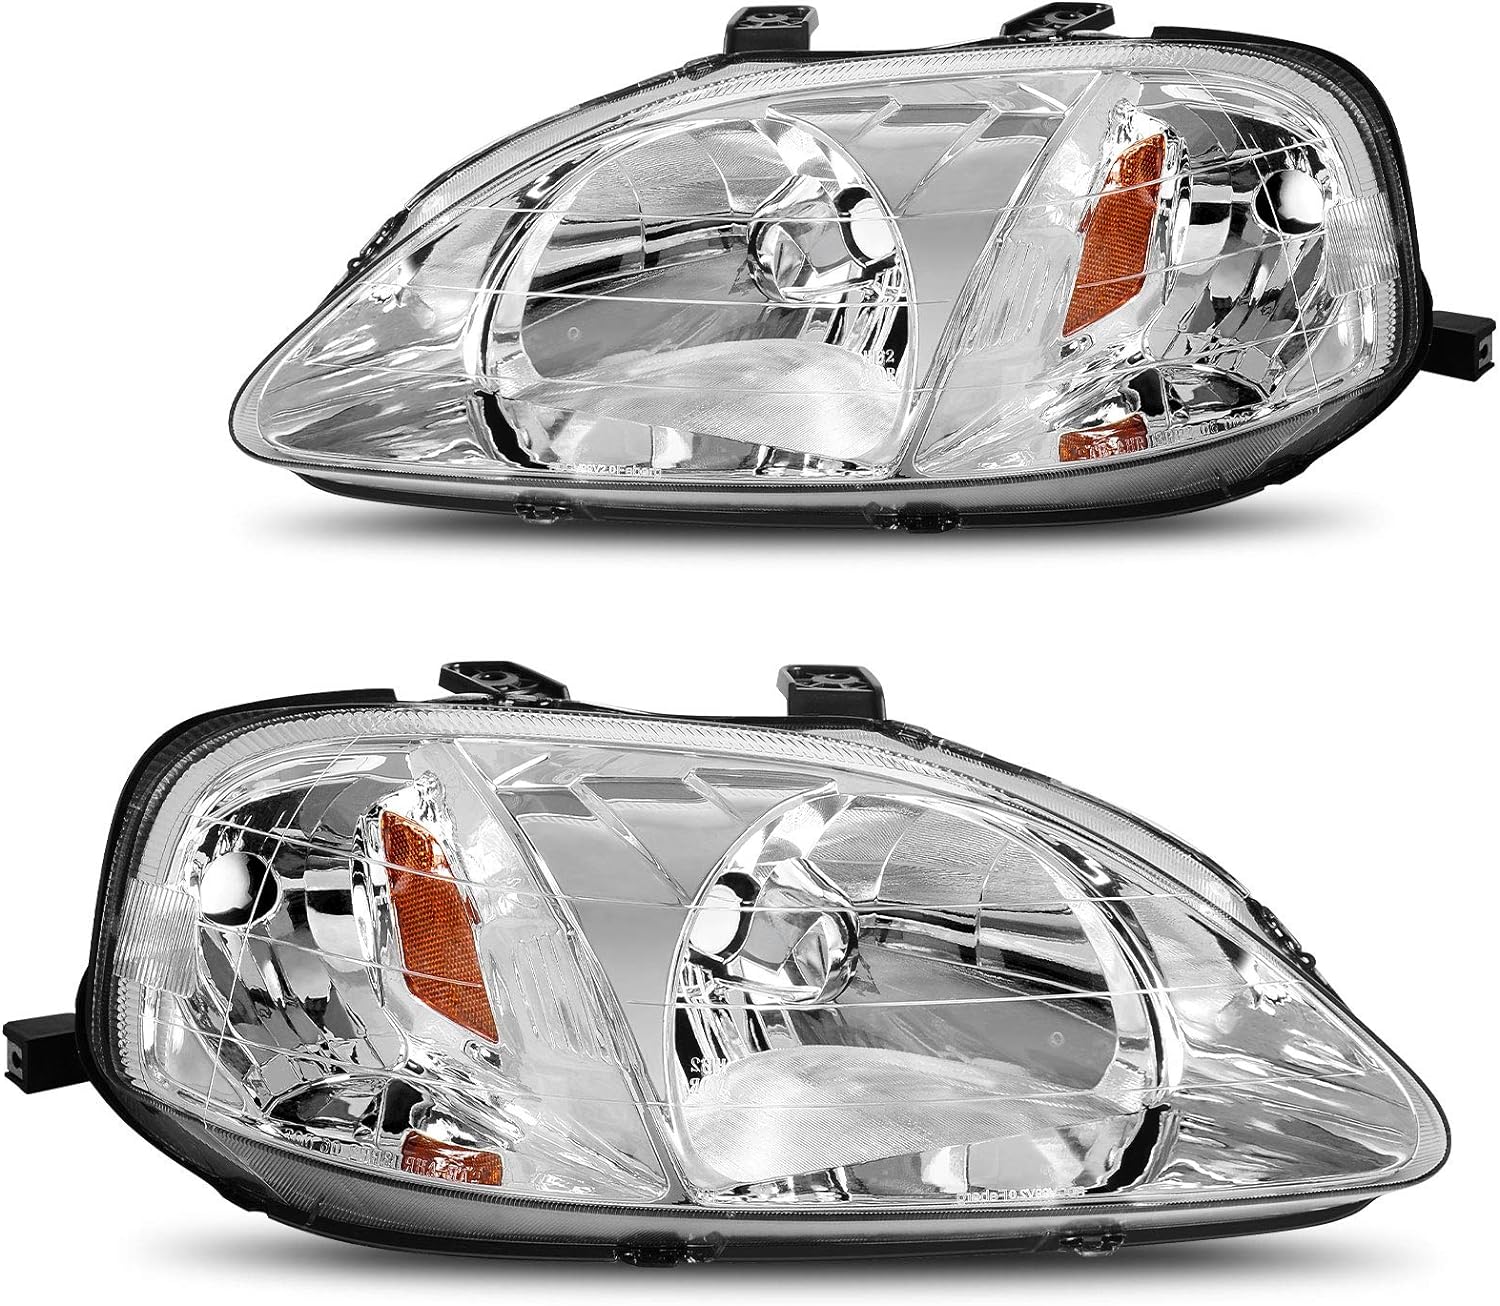 DWVO Headlight Assembly Compatible with 99 00 1999 2000 Civic Headlamps (Chrome Housing Clear Lens Amber Reflector)